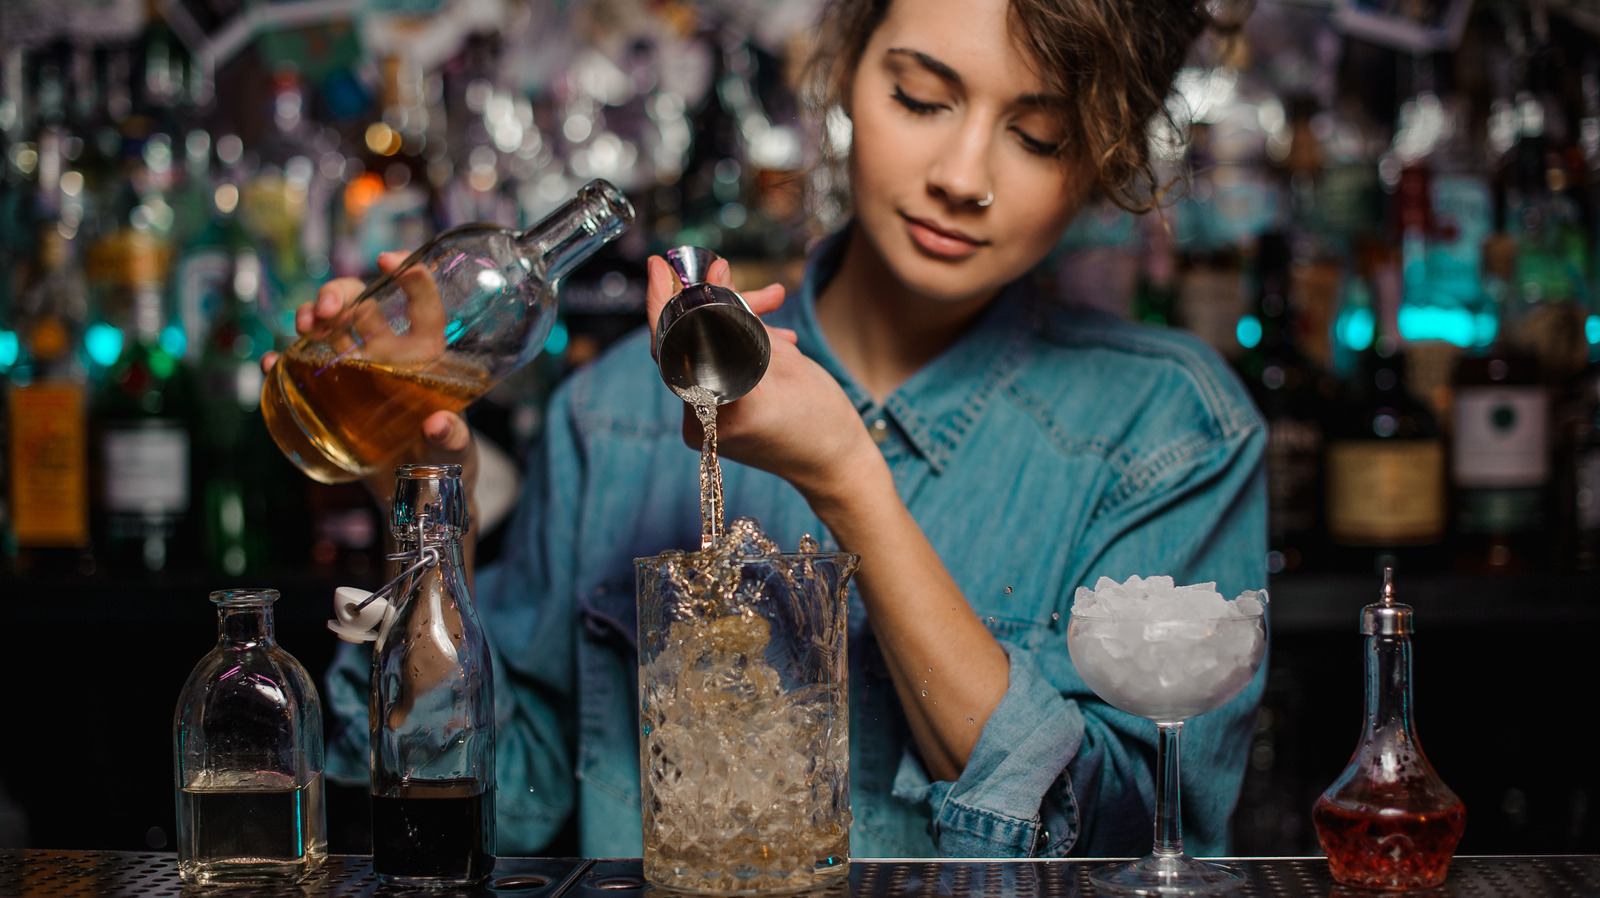 Bartender pouring alcohol into jigger for precise measurement